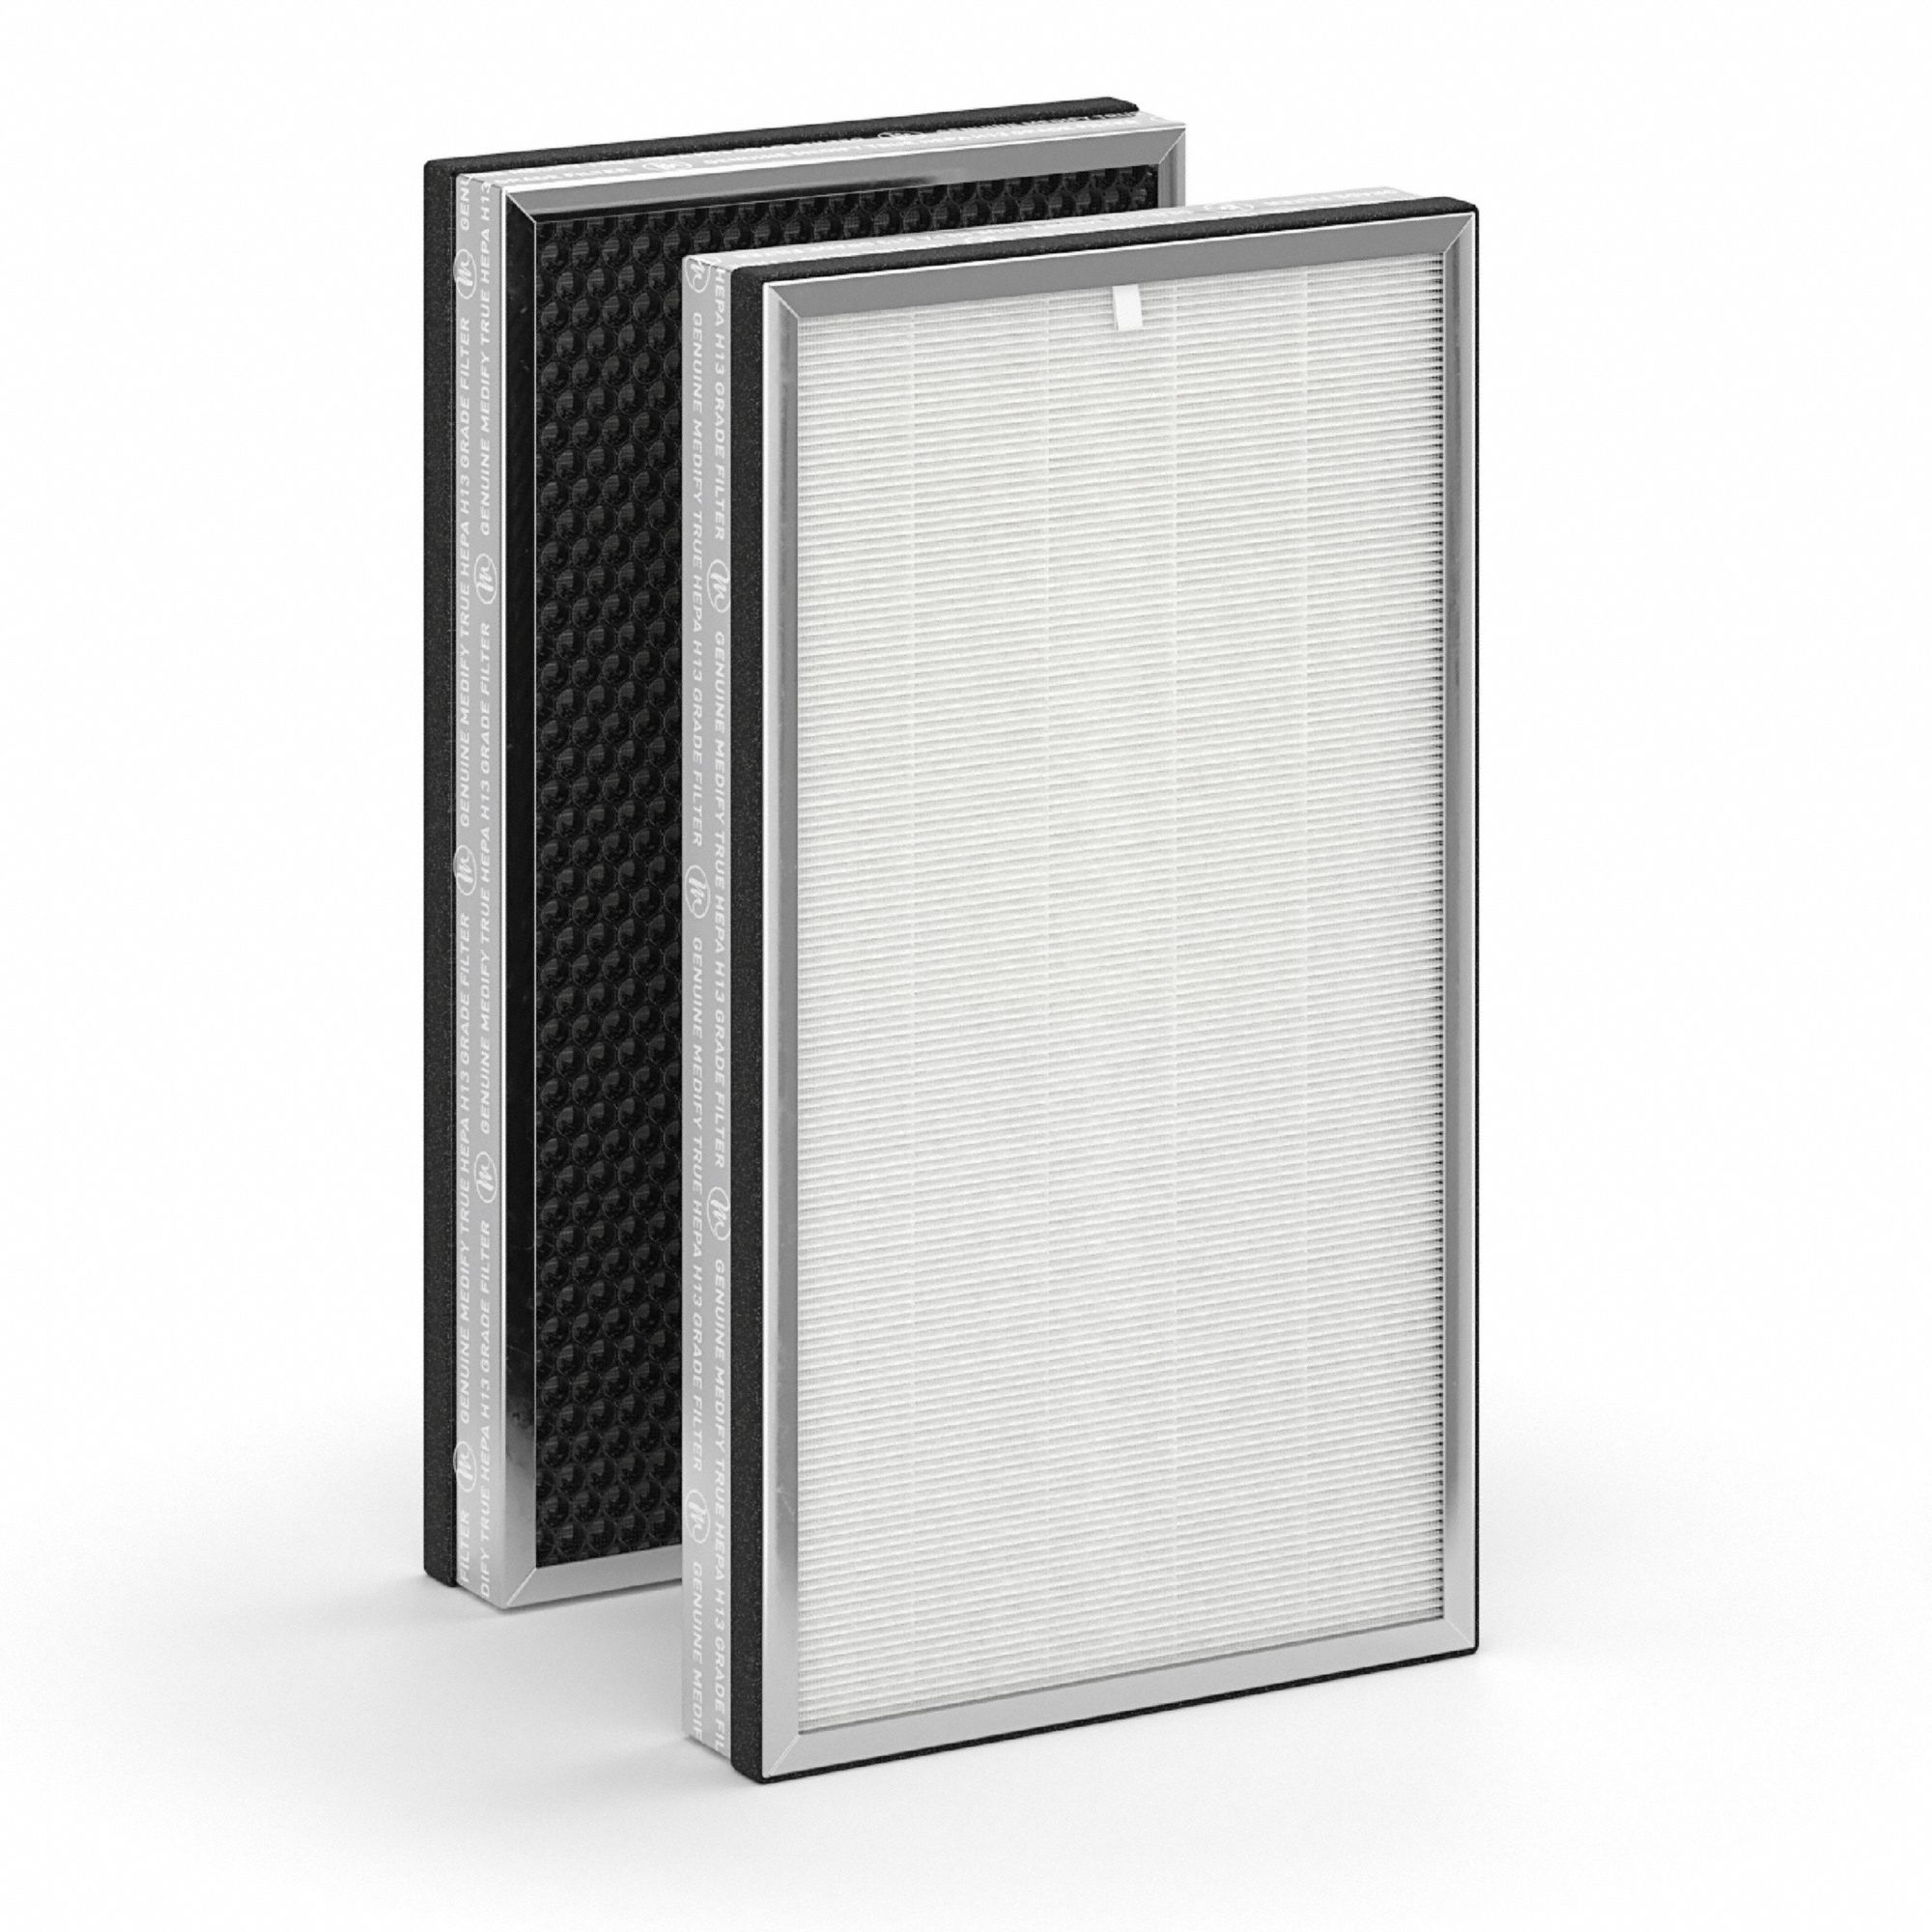 Replacement filter for MA-112: HEPA/Pleated/Carbon, MERV 17